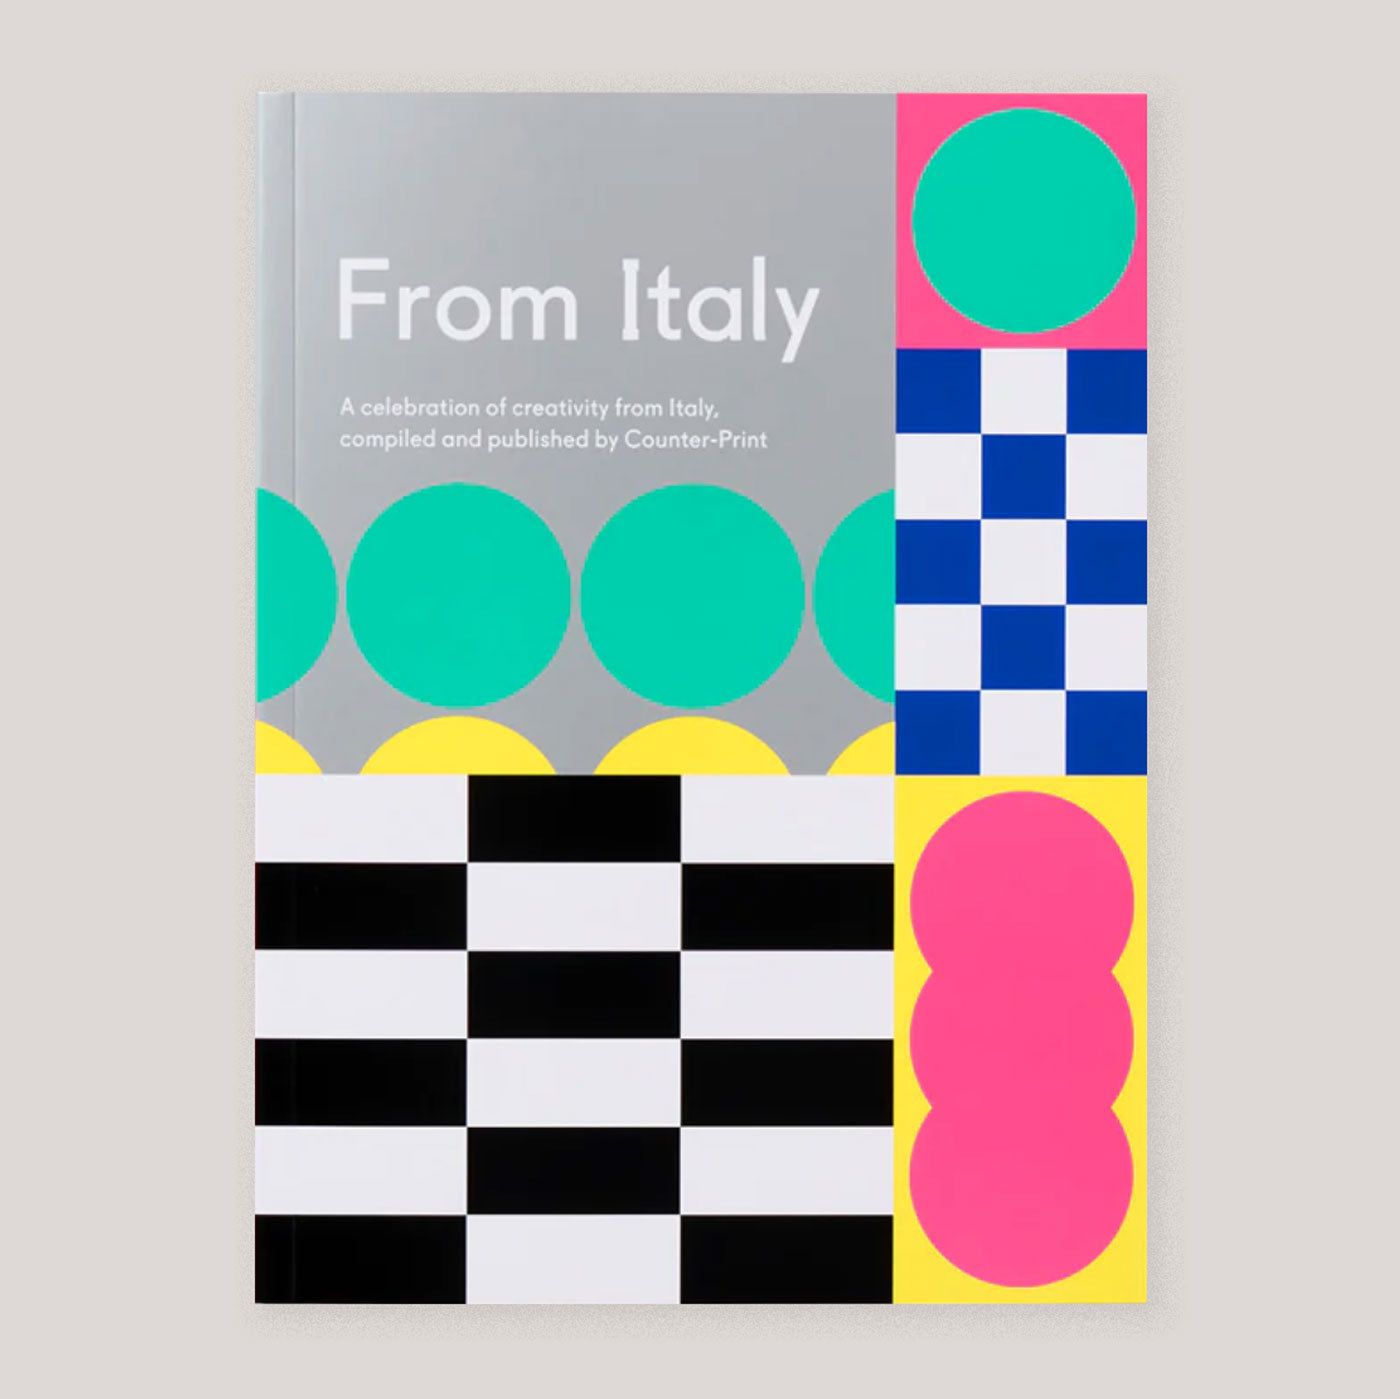 From Italy | Counterprint